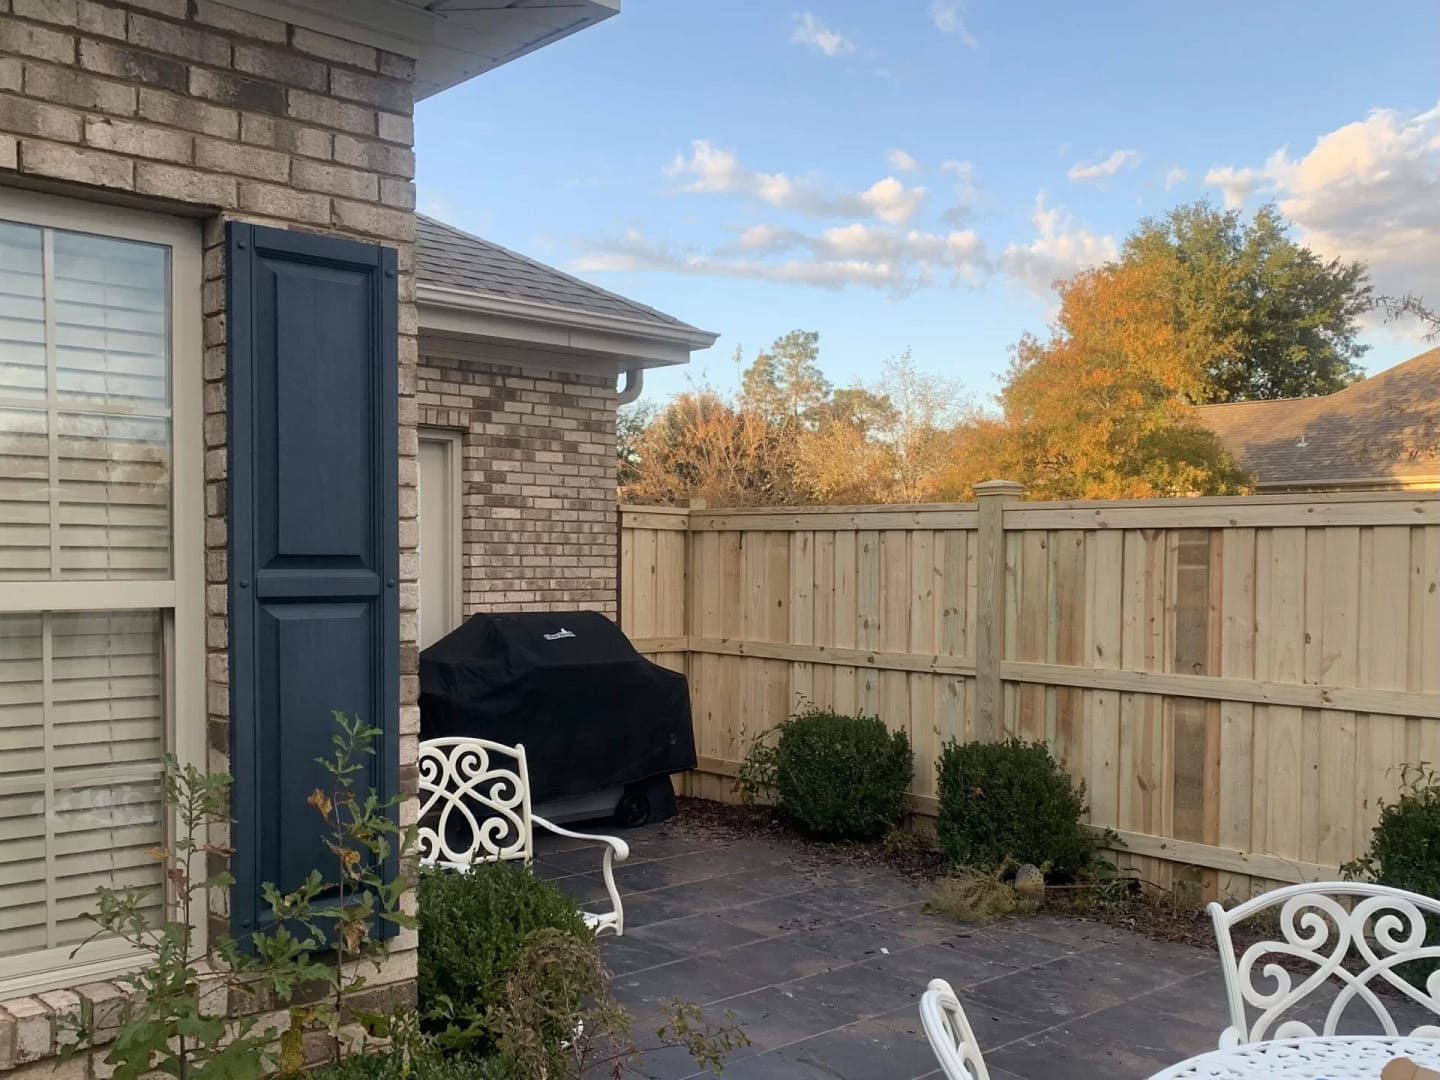 Element Fence Company isn't just about fences, we transform your yard into a beautiful and functional space where you'll love to spend time relaxing.